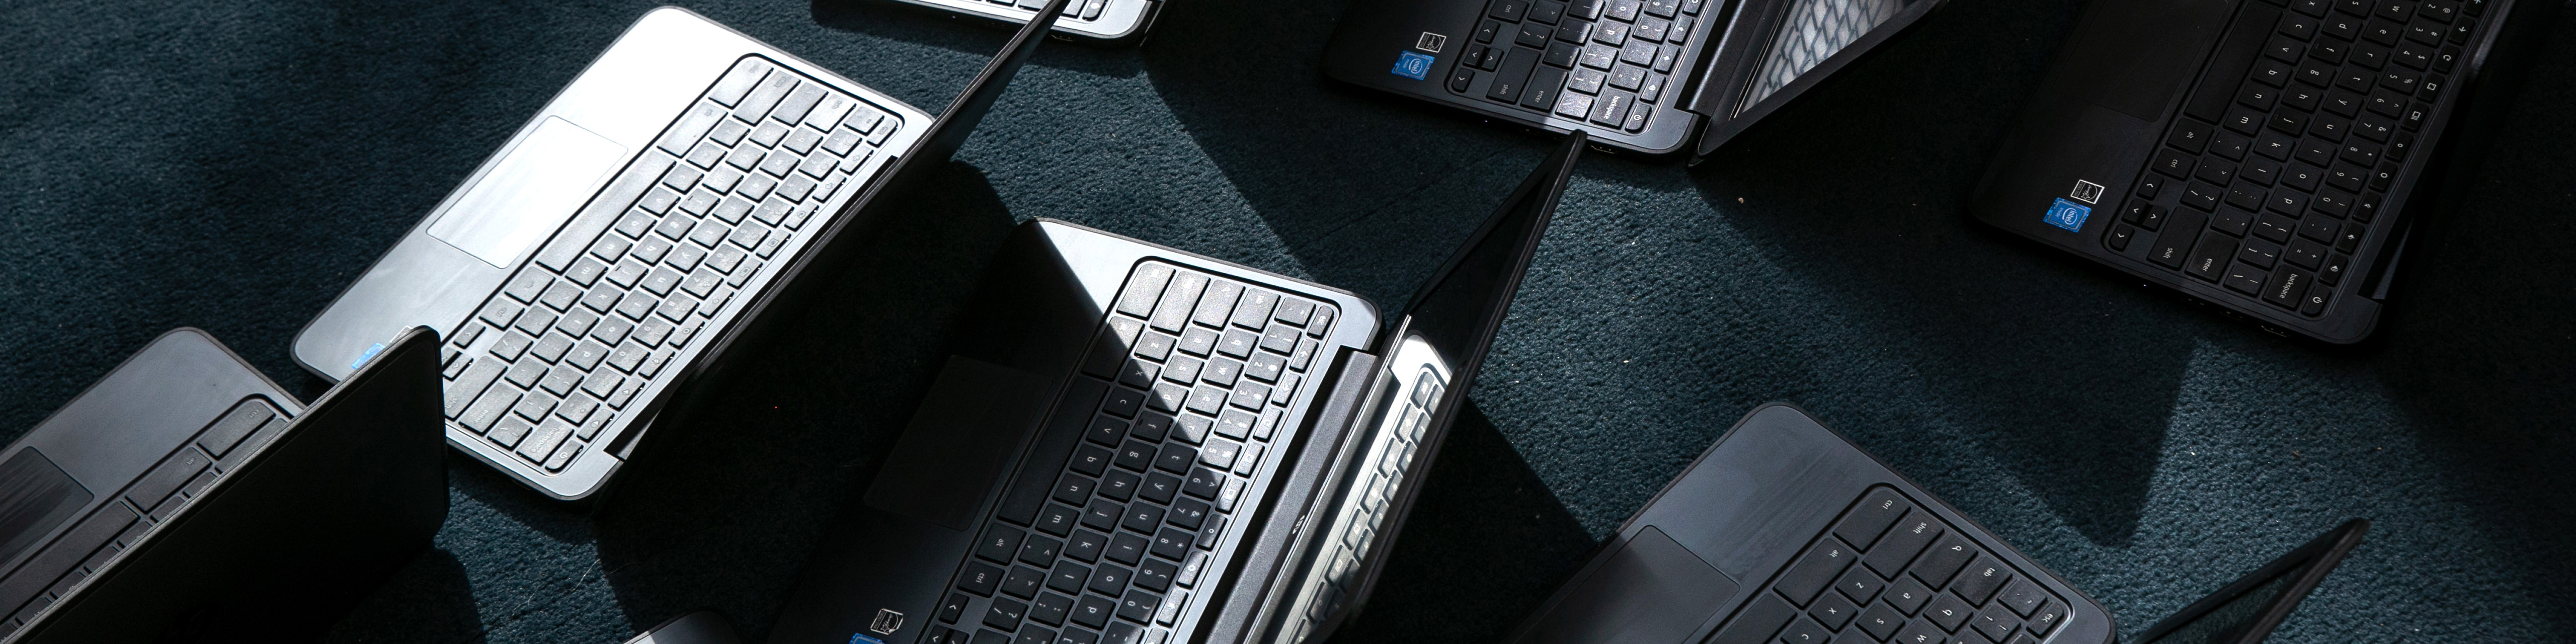 A photo from above of a group of black laptops, open and sitting on a carpeted floor